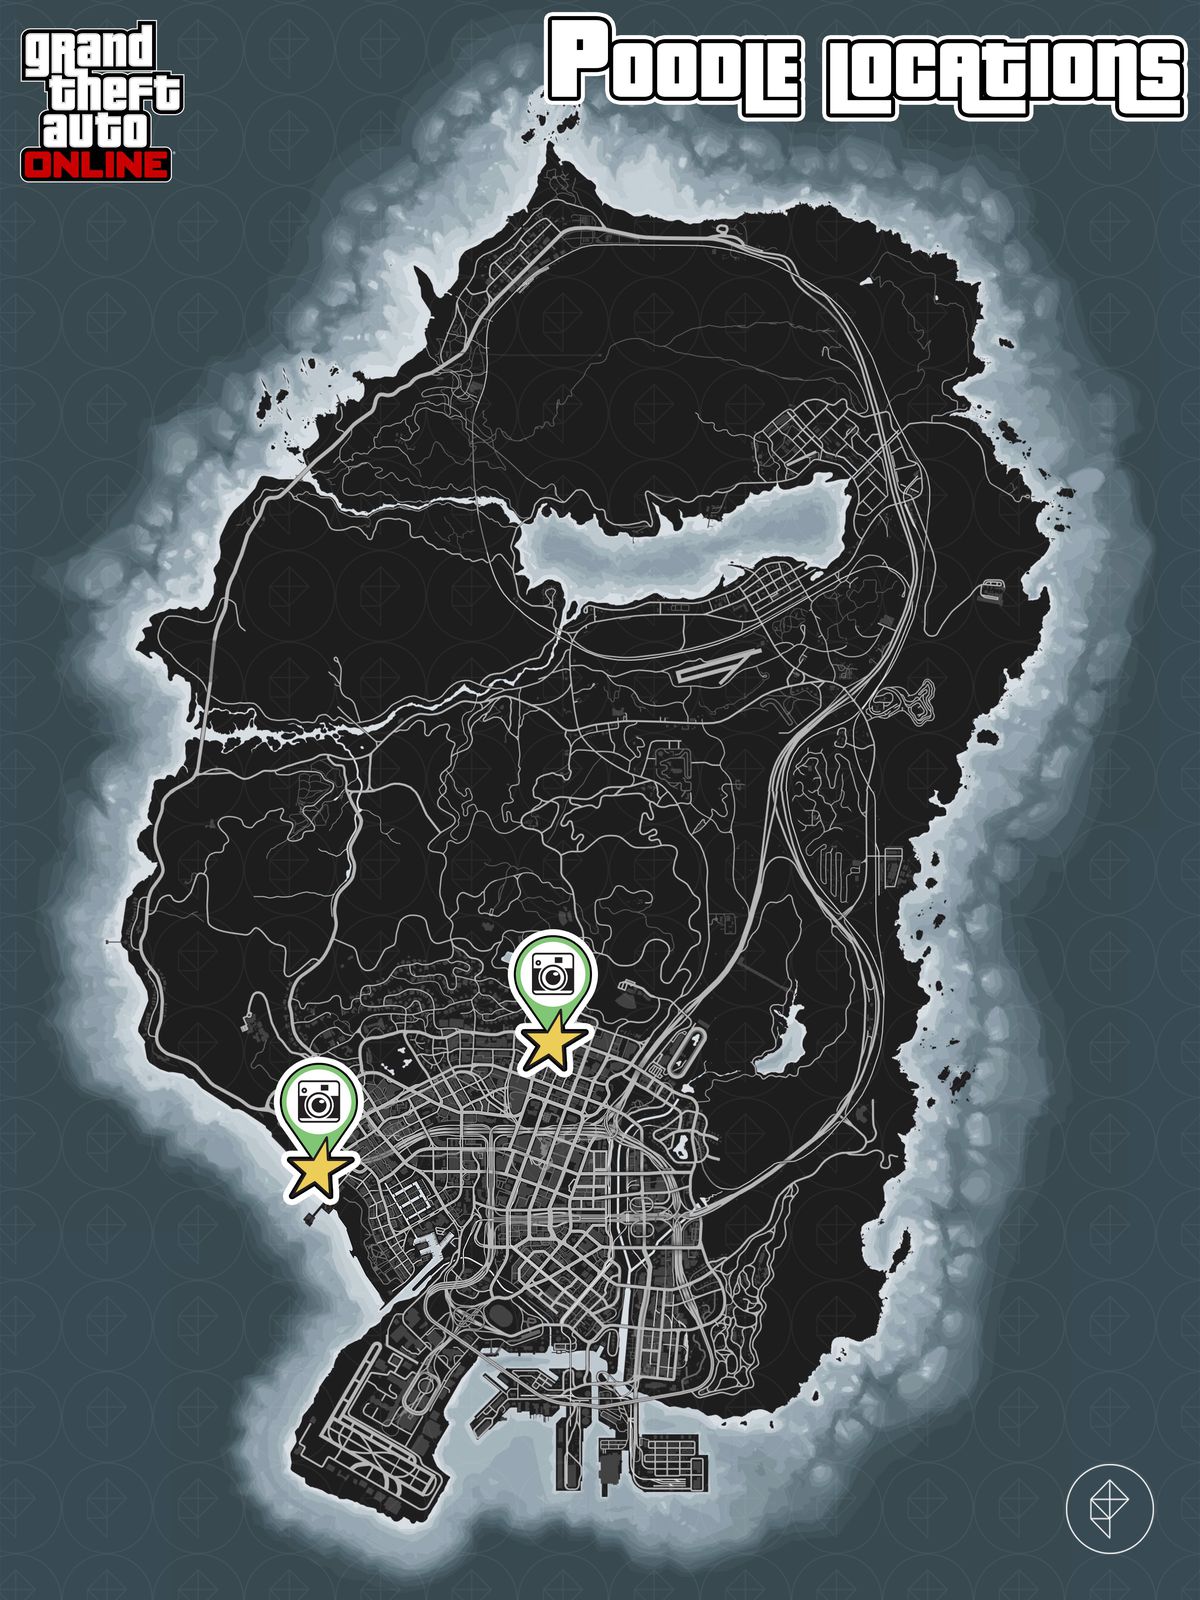 GTA Online map showing poodle locations